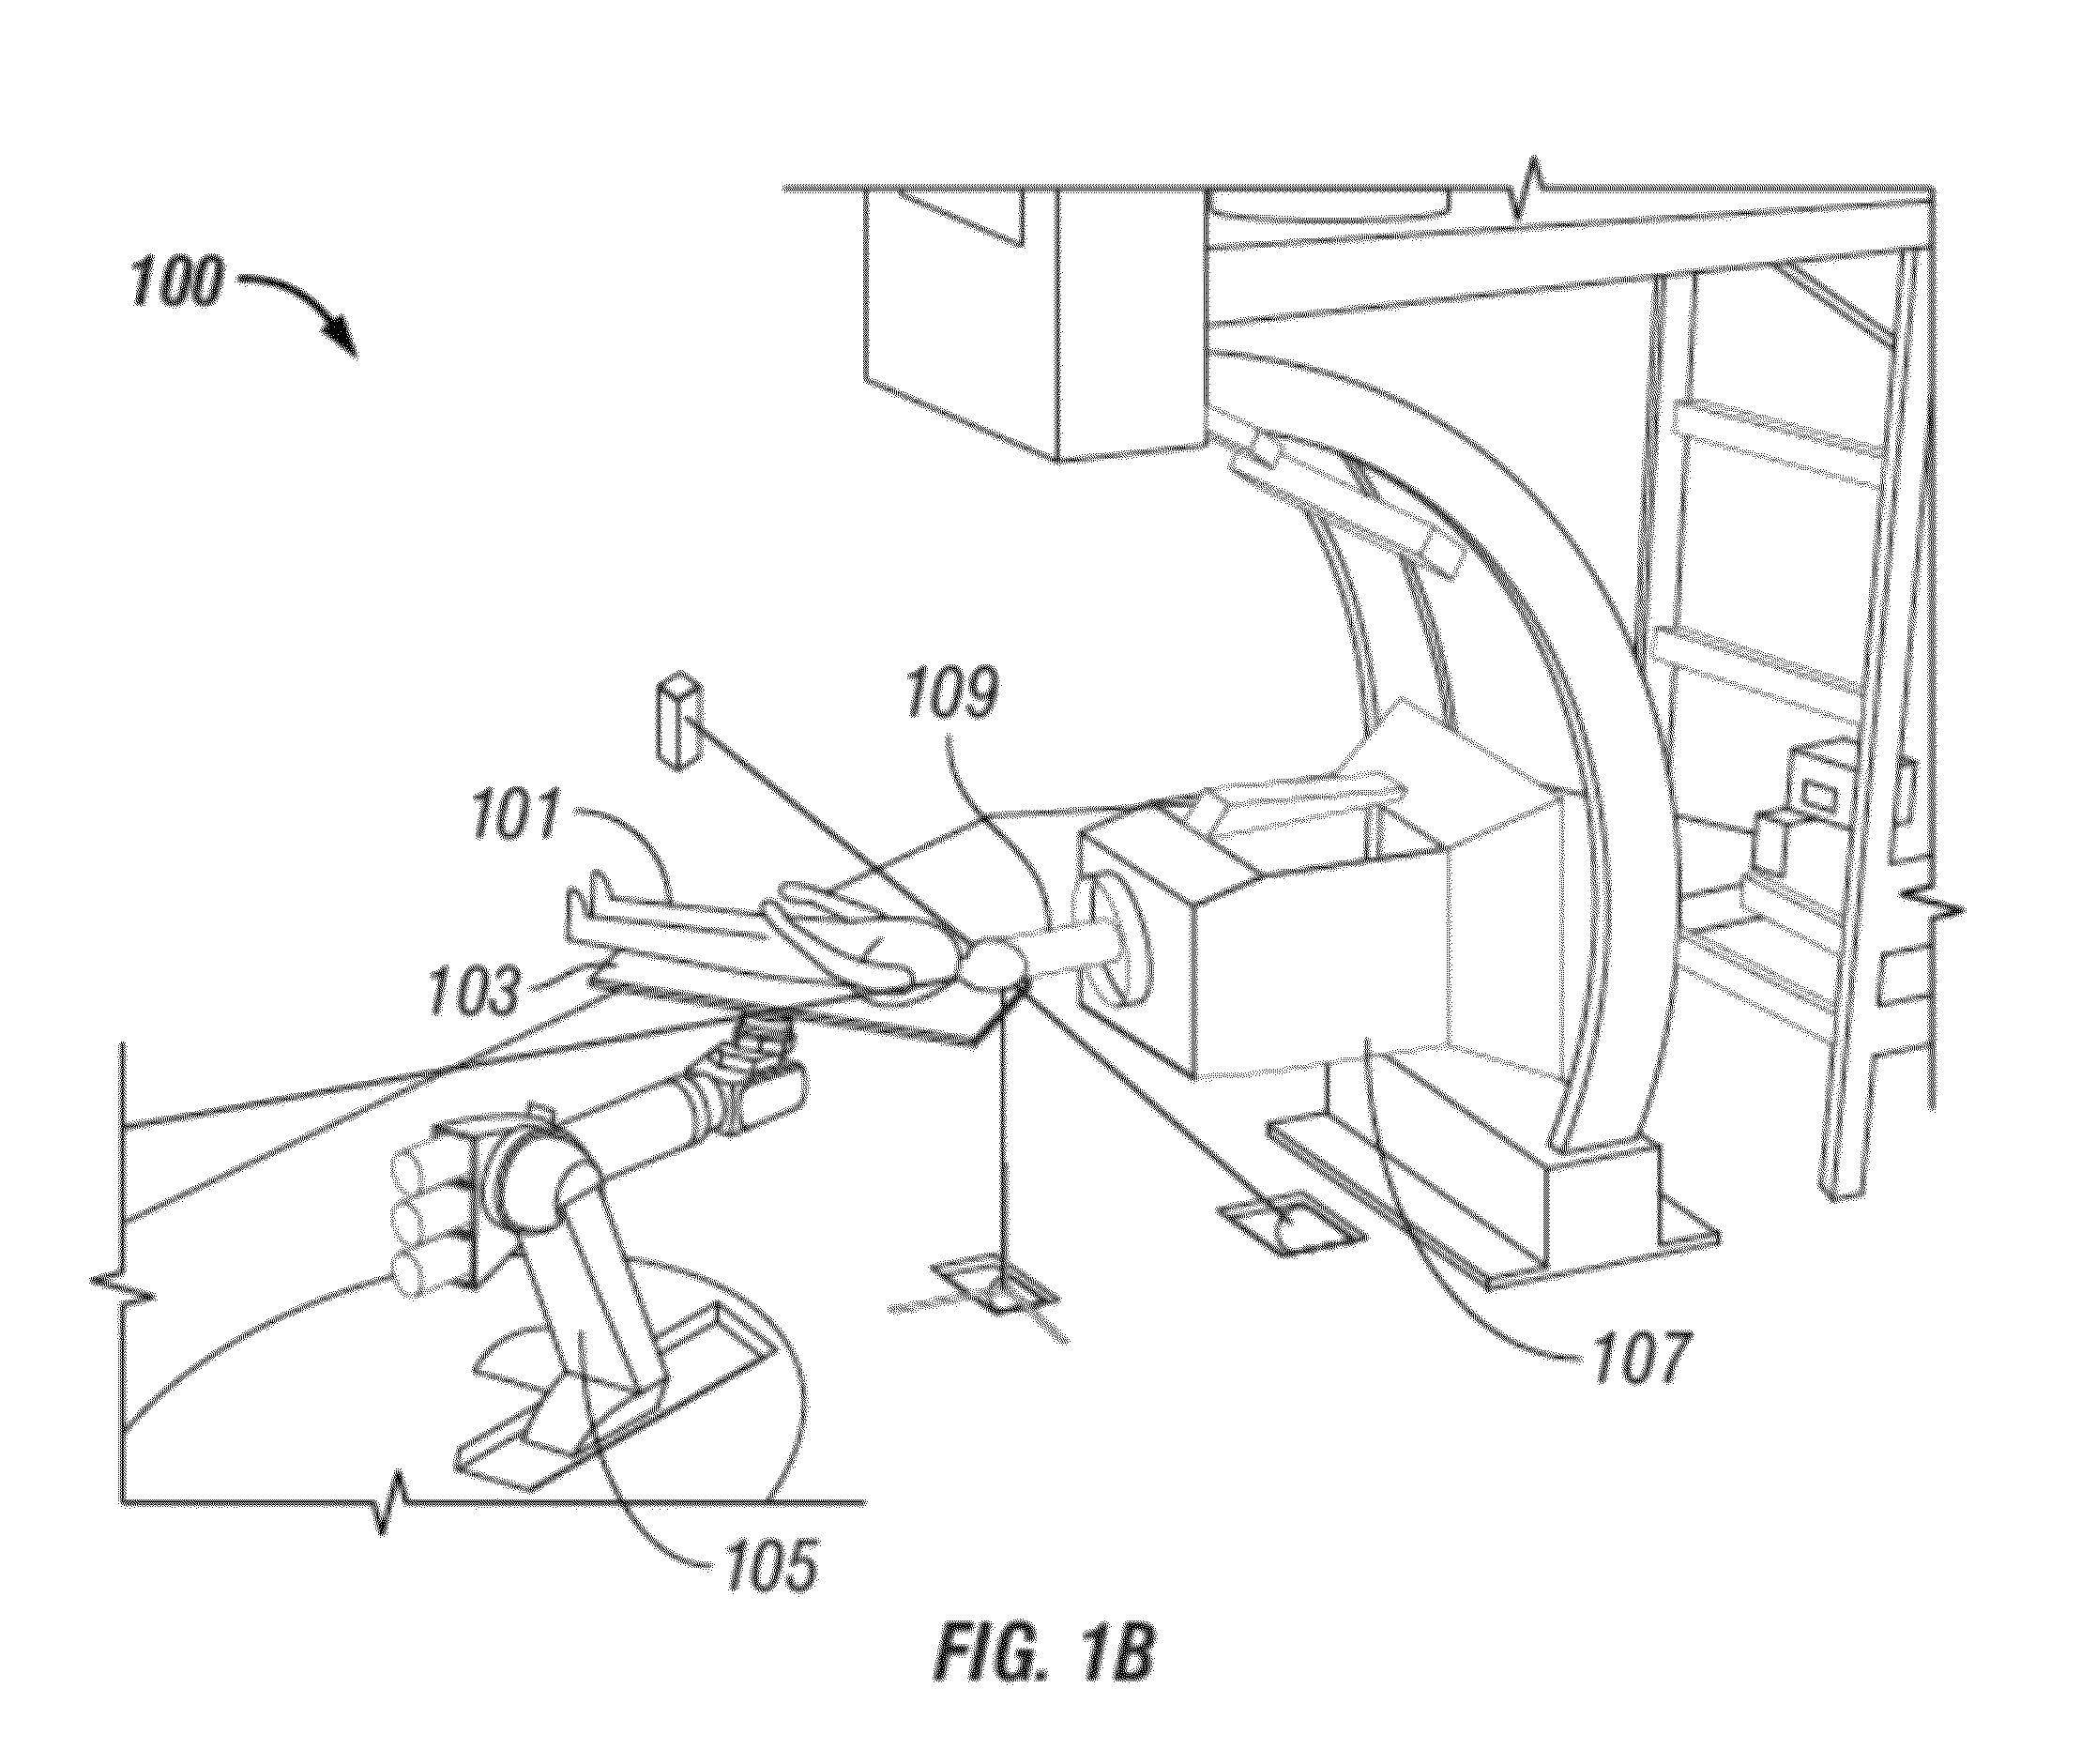 System and method for radiation therapy imaging and treatment workflow scheduling and optimization